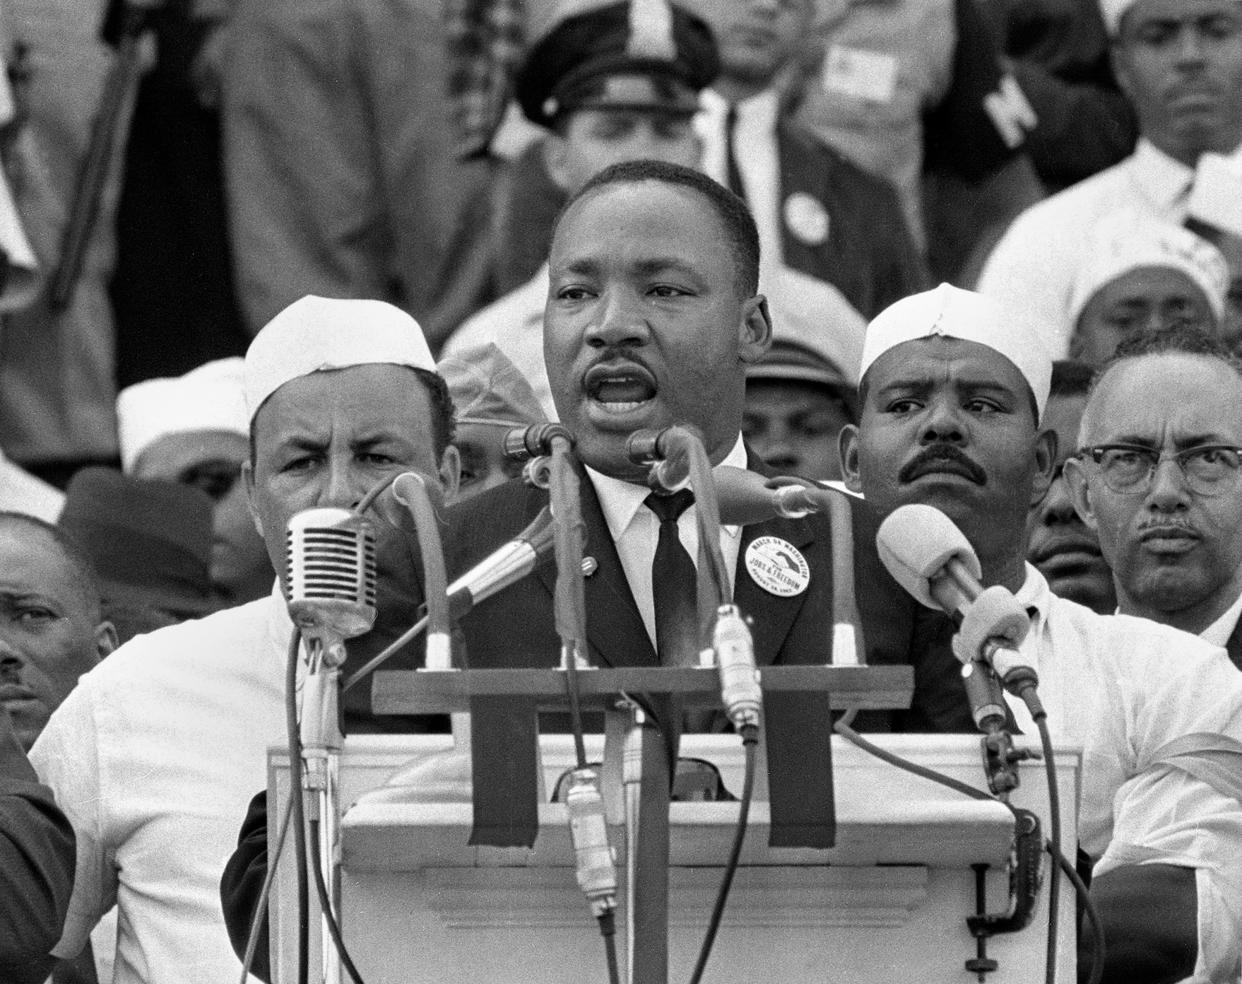 In this Aug. 28, 1963 file photo, Dr. Martin Luther King Jr. addresses marchers during his "I Have a Dream" speech at the Lincoln Memorial in Washington.